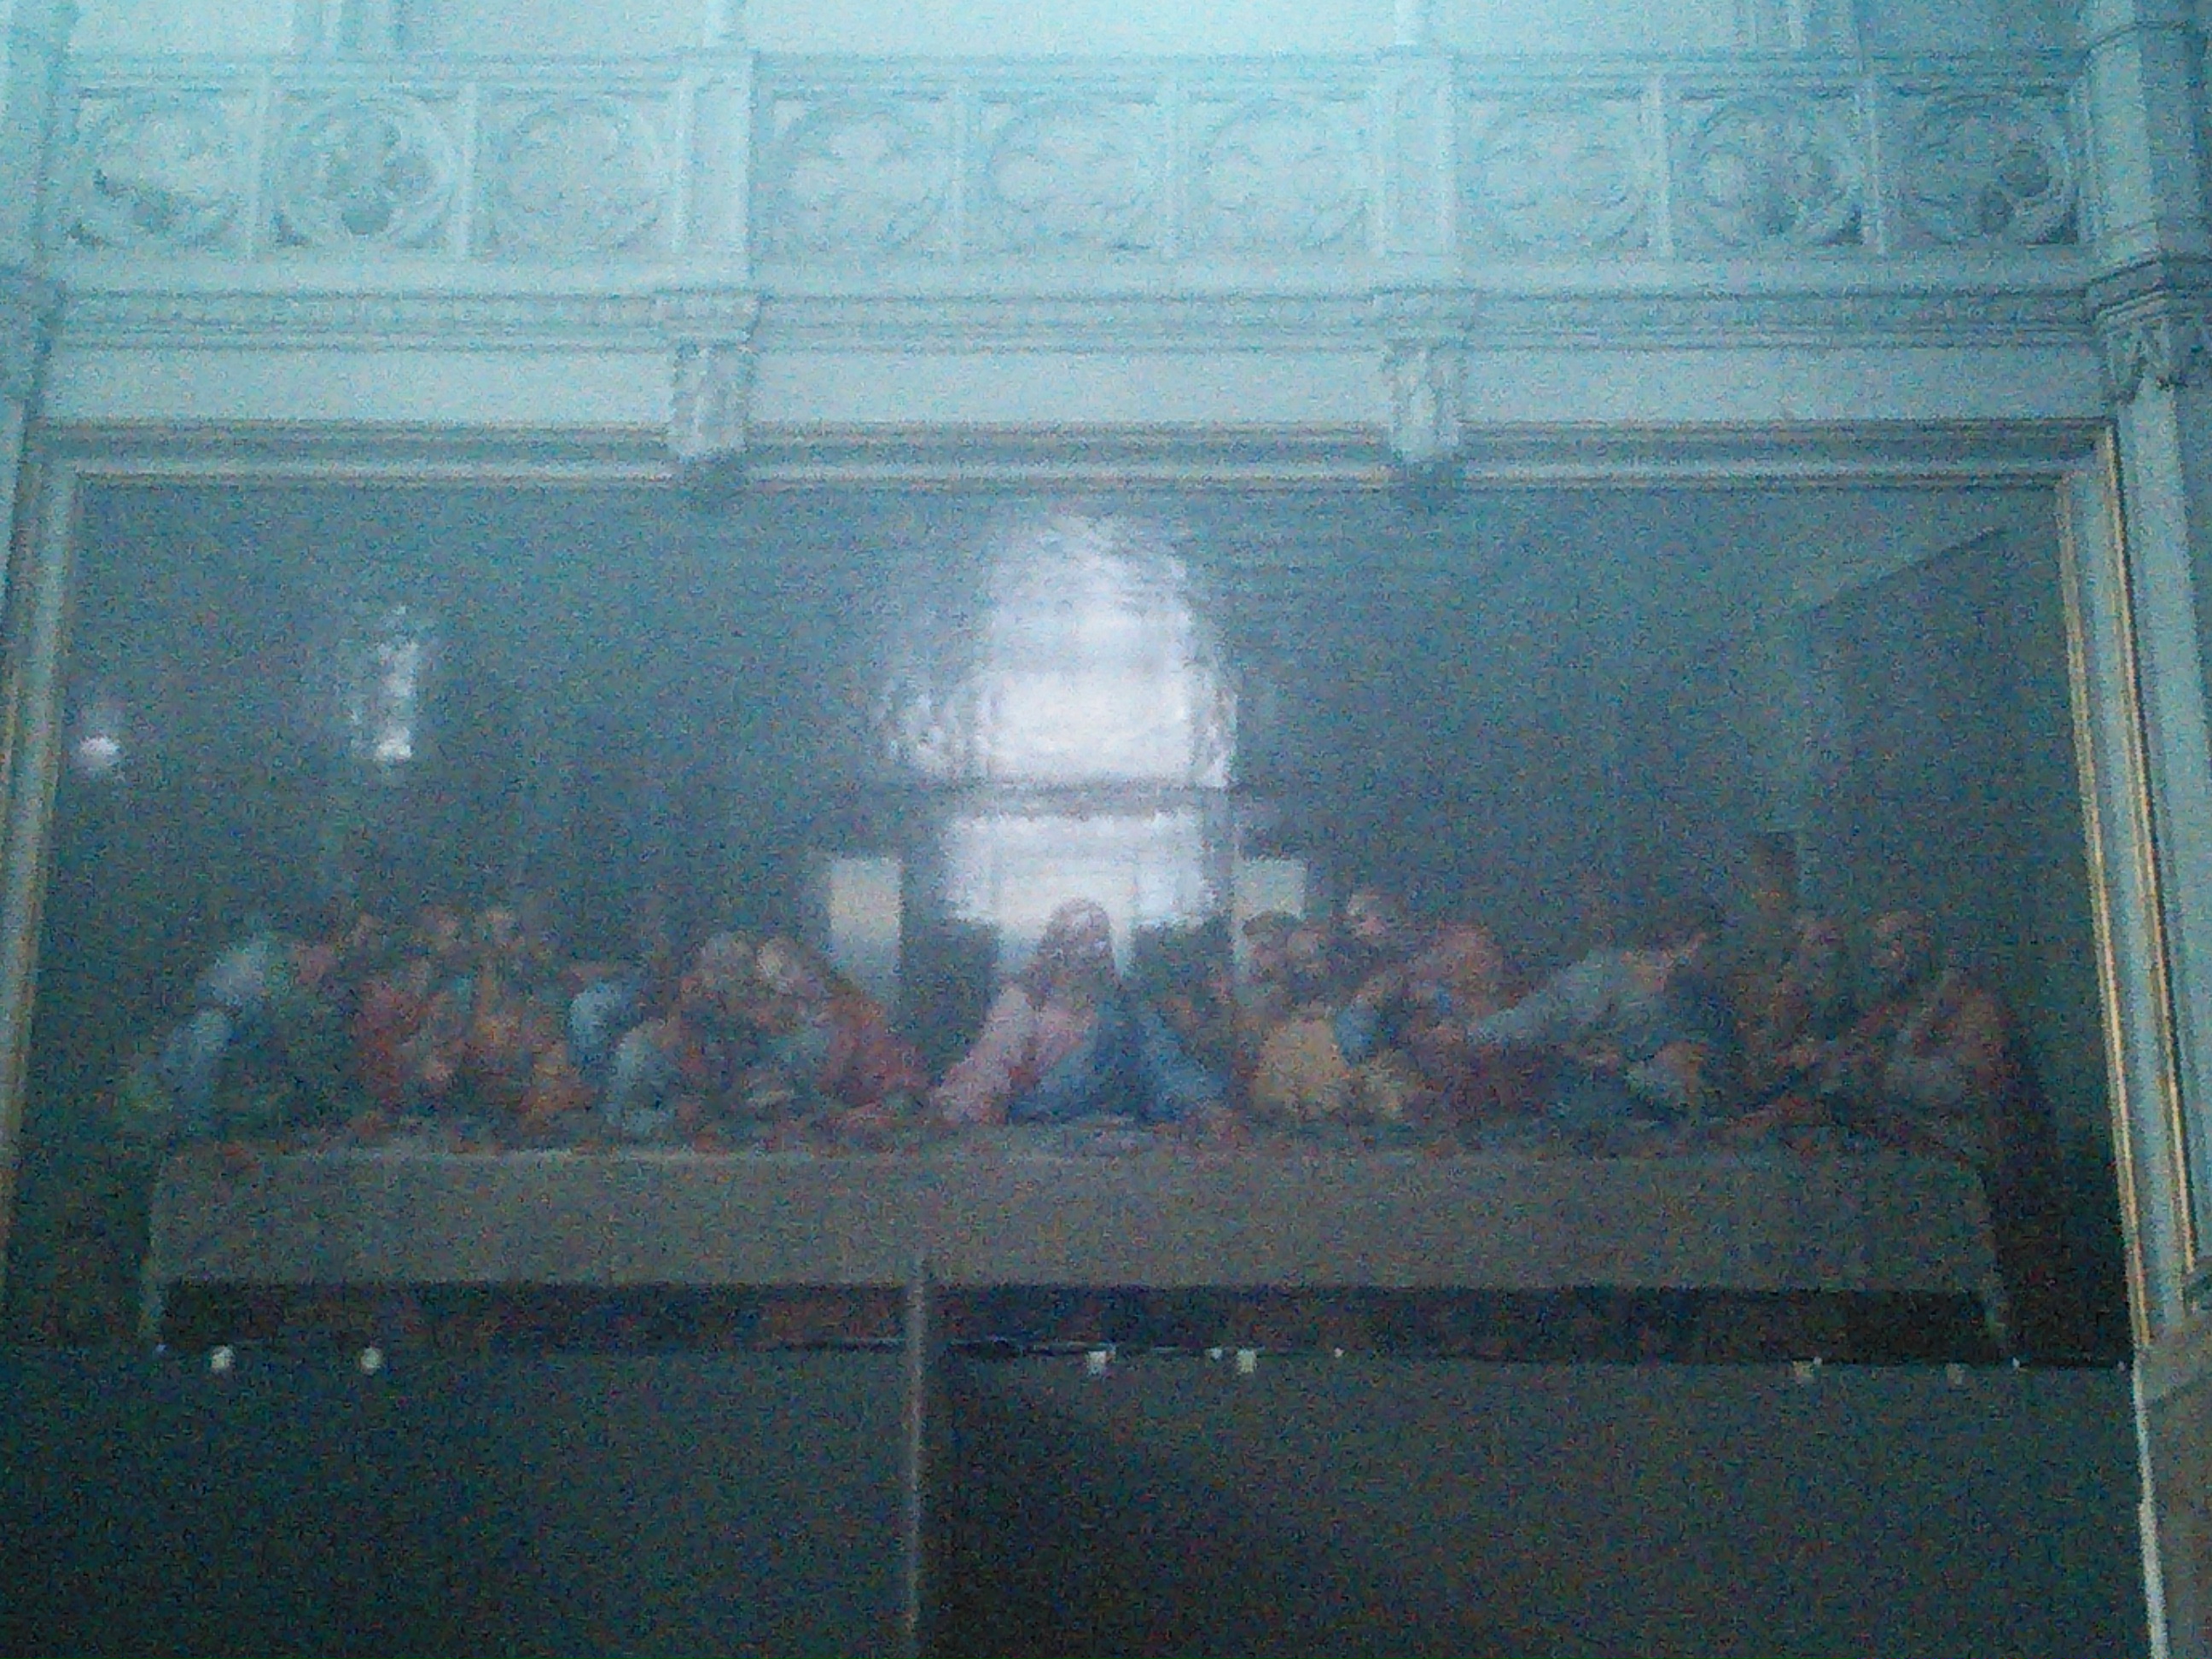 Church of the Minorities Last Supper mosaic comissioned by Napoleon